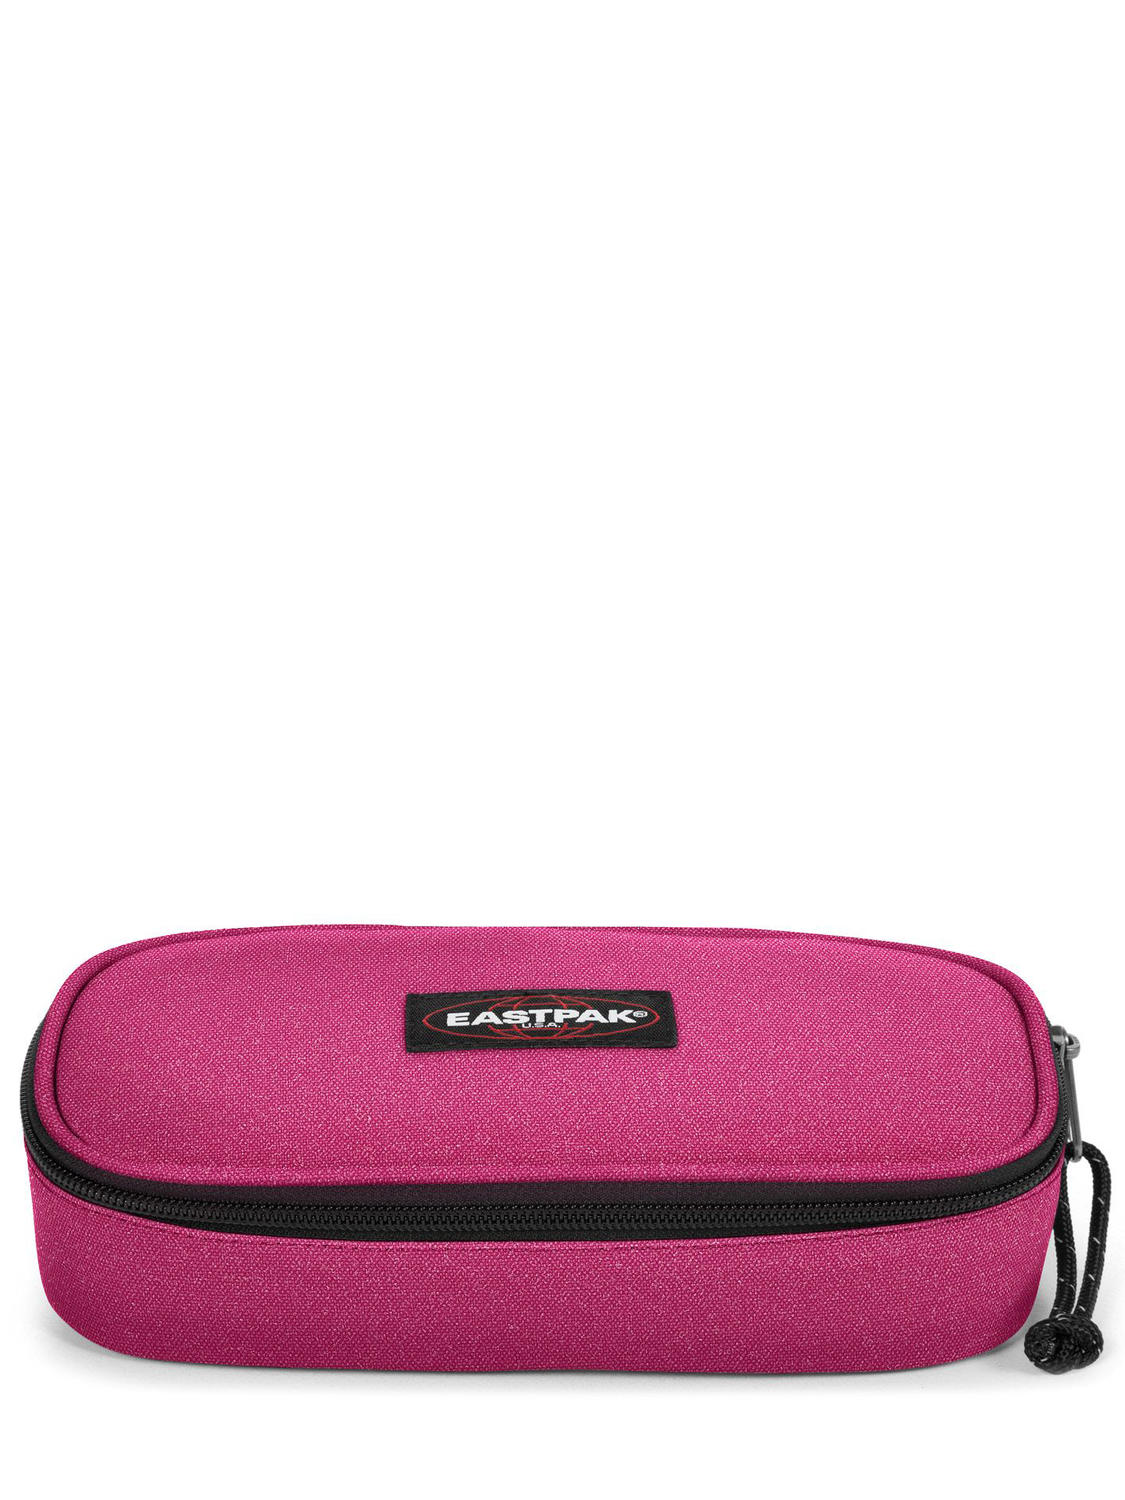 Eastpak Oval Astuccio Ruby Pink - Acquista A Prezzi Outlet!